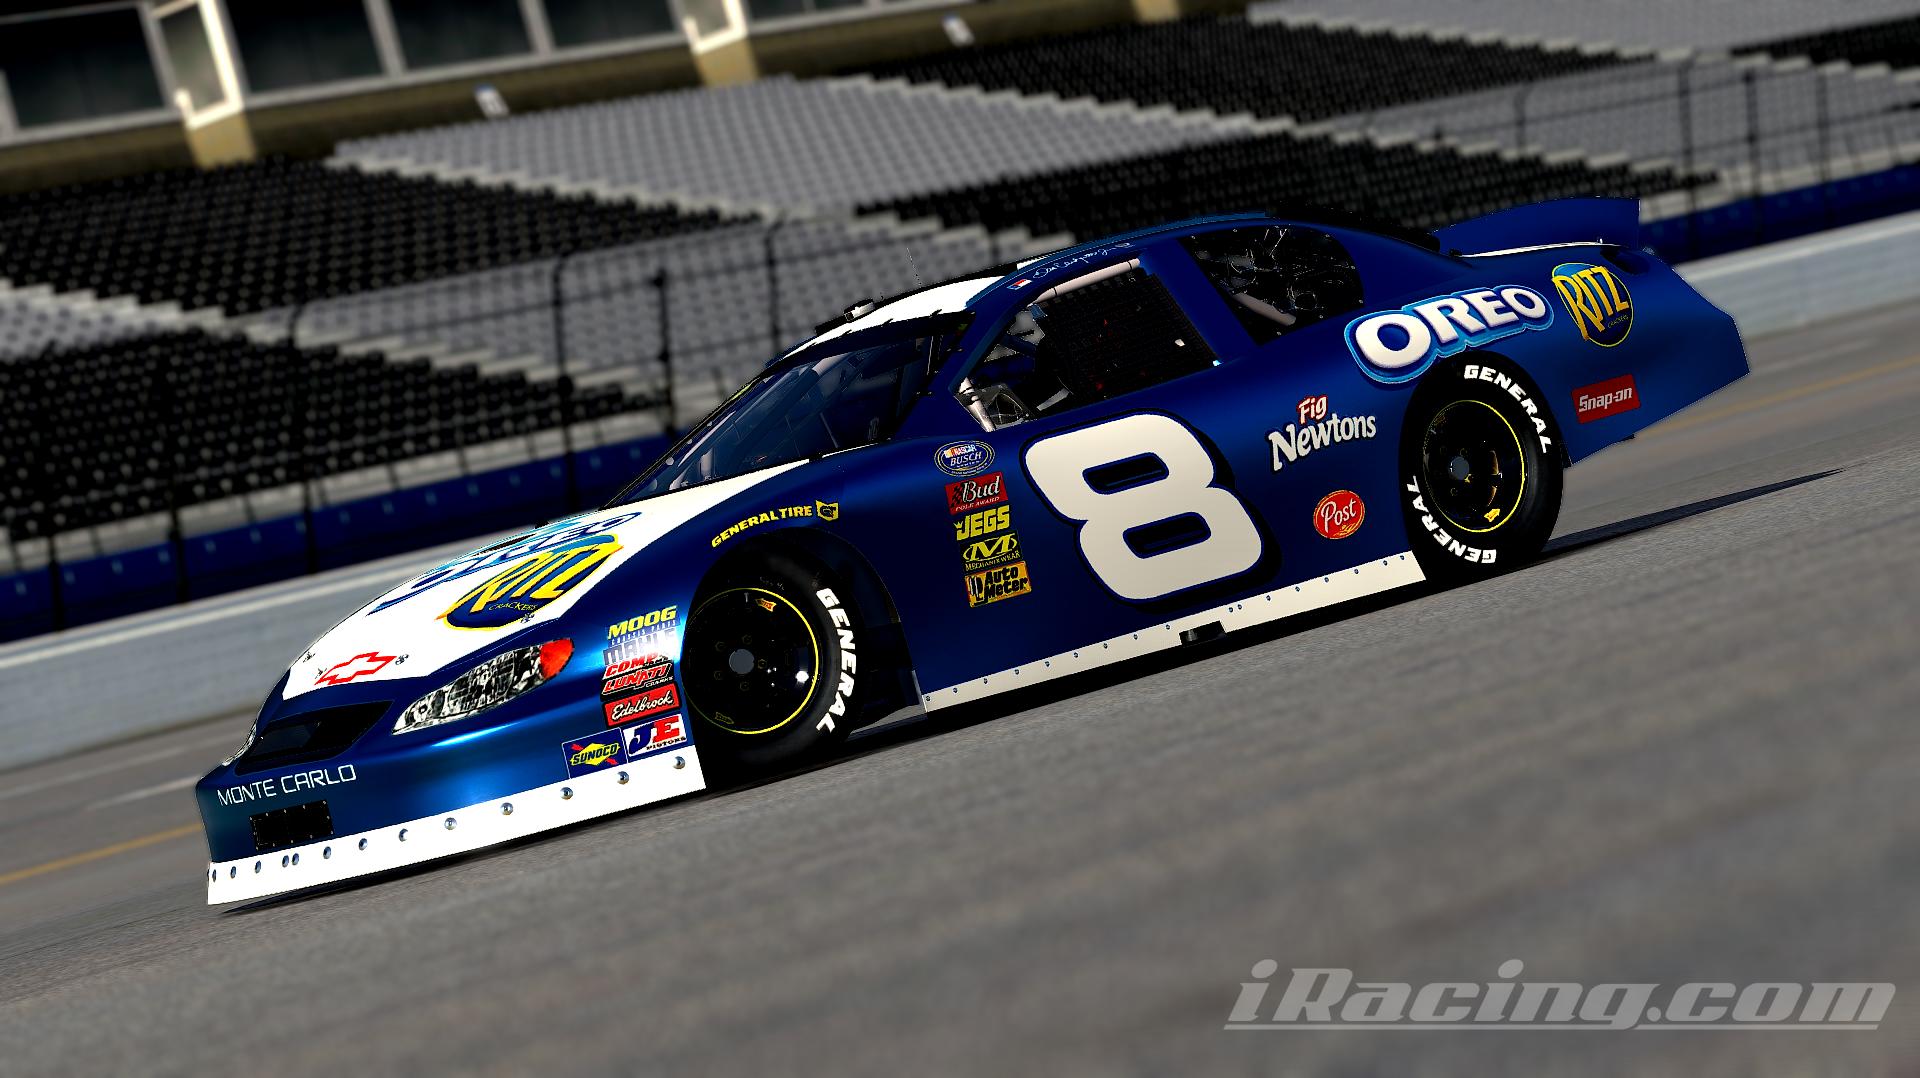 Preview of Dale Jr. Busch Series | Oreo/Ritz | Monte Carlo by Lucas Hoitsma